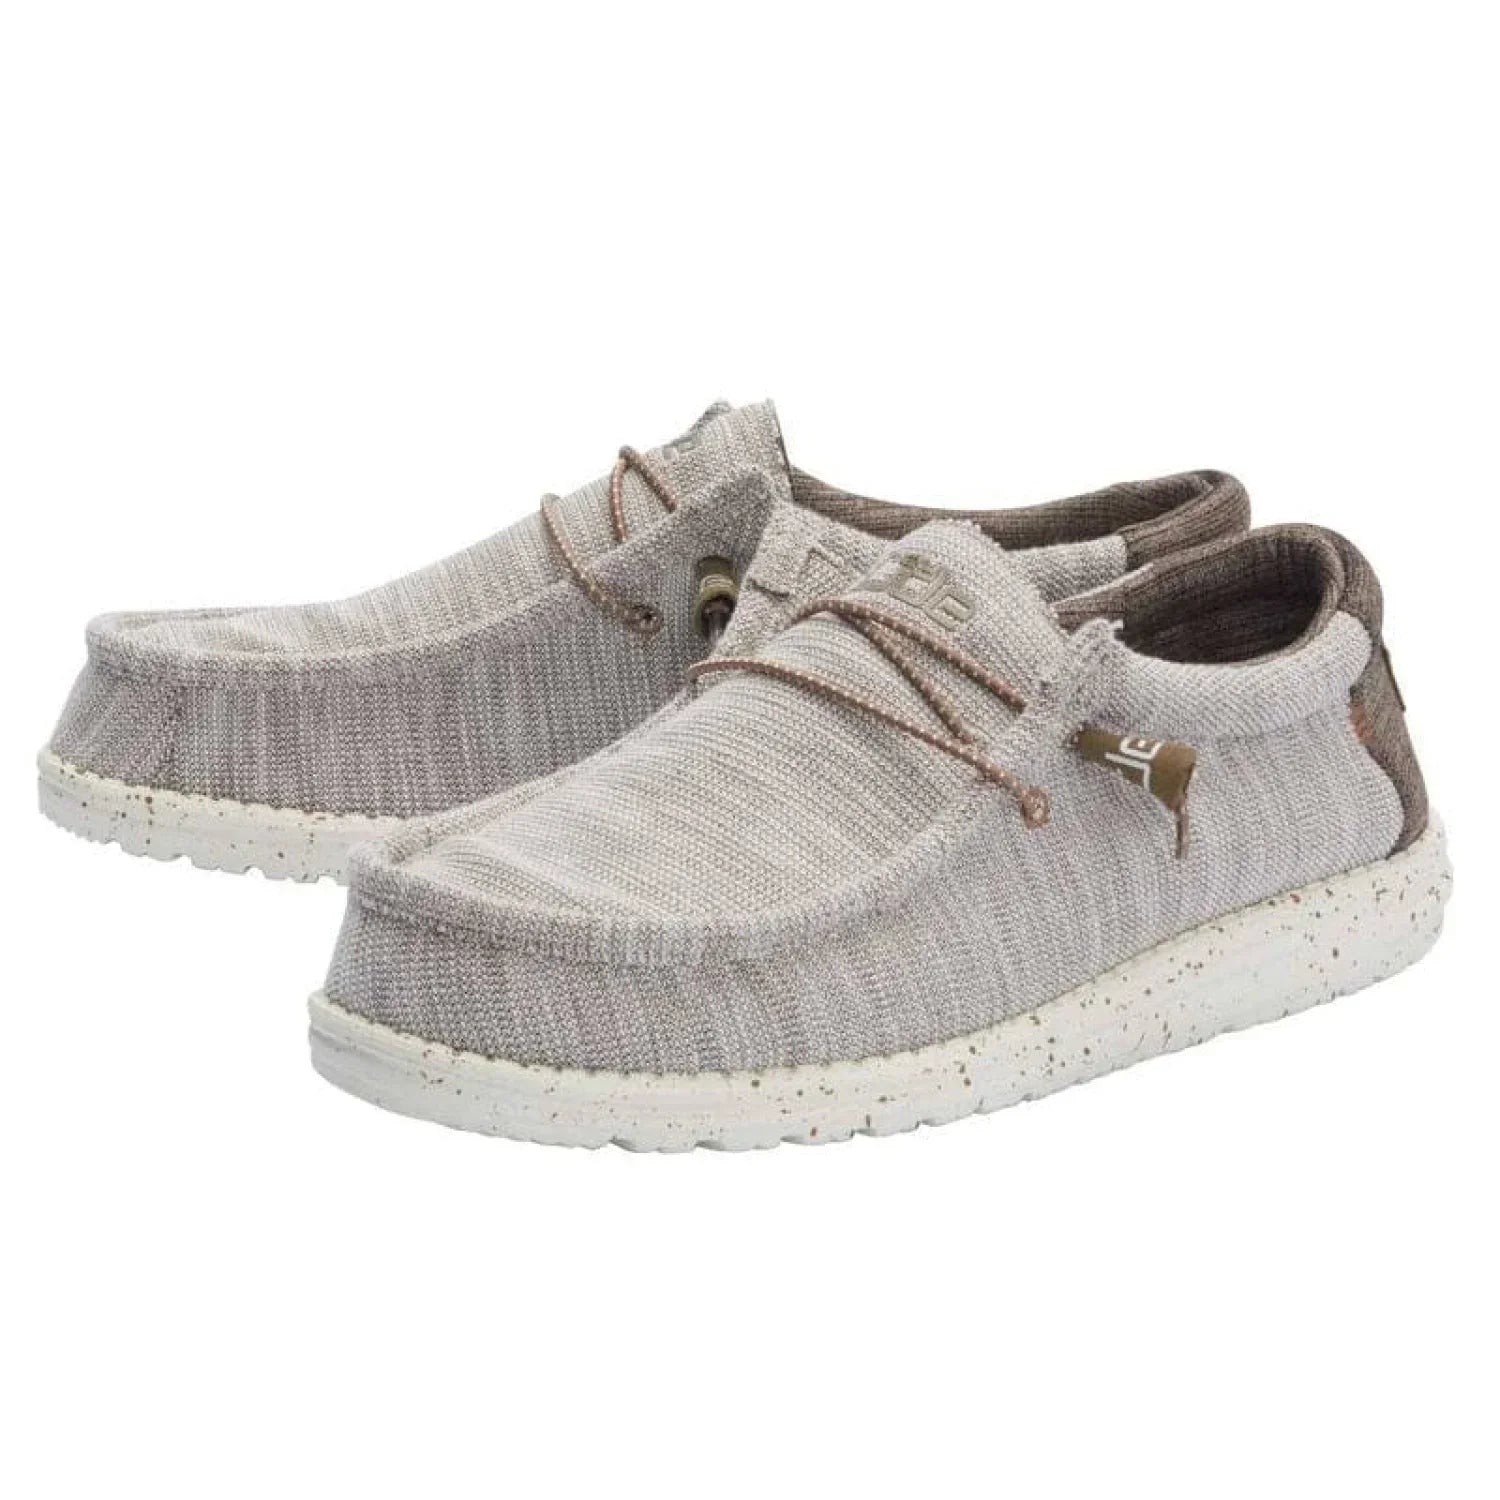 HEY DUDE MENS FOOTWEAR - MENS SHOES - MENS SHOES CASUAL Wally Stretch Mix LIMESTONE